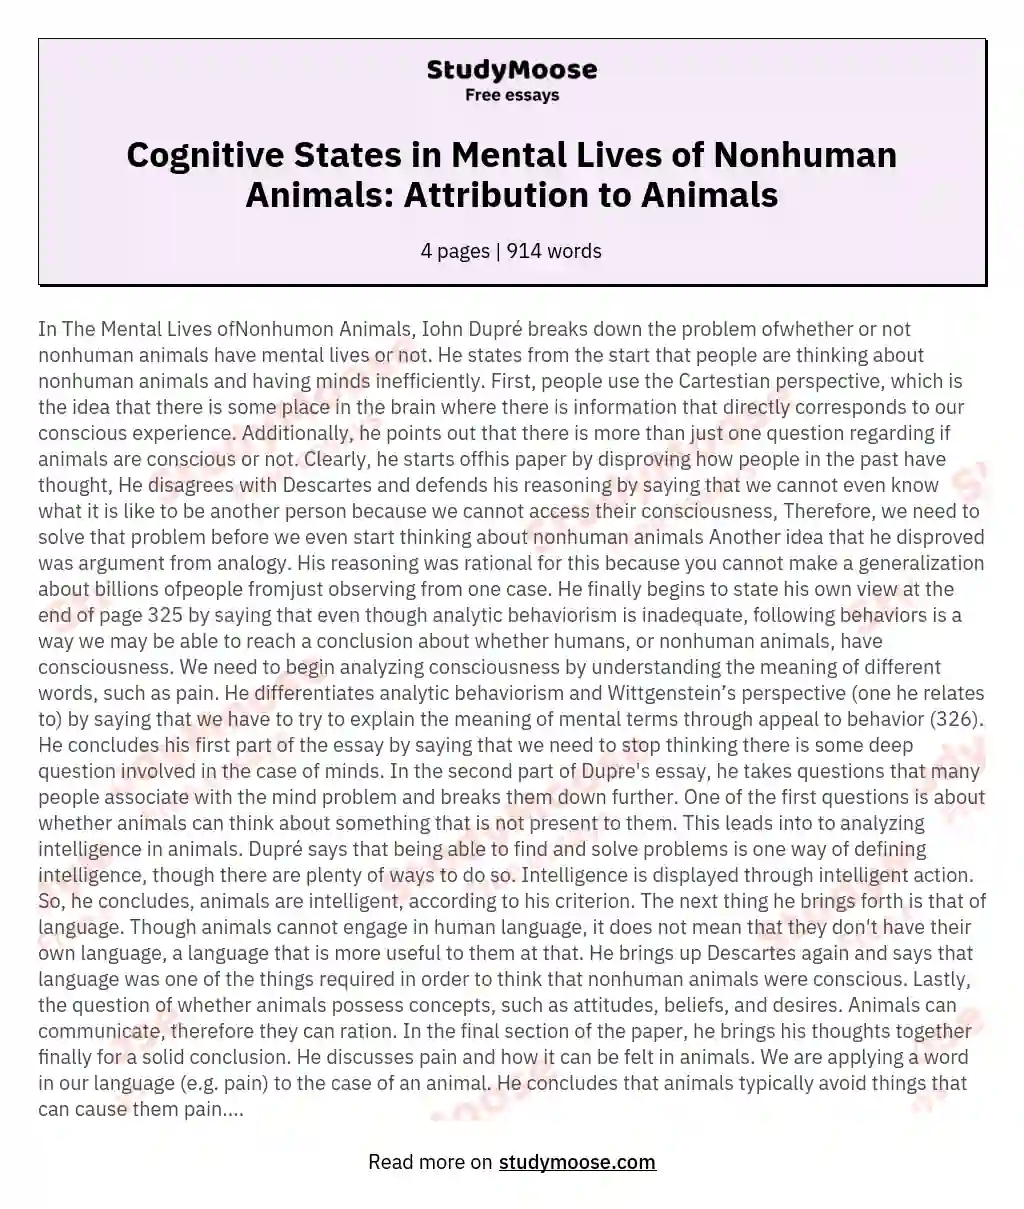 Cognitive States in Mental Lives of Nonhuman Animals: Attribution to Animals essay